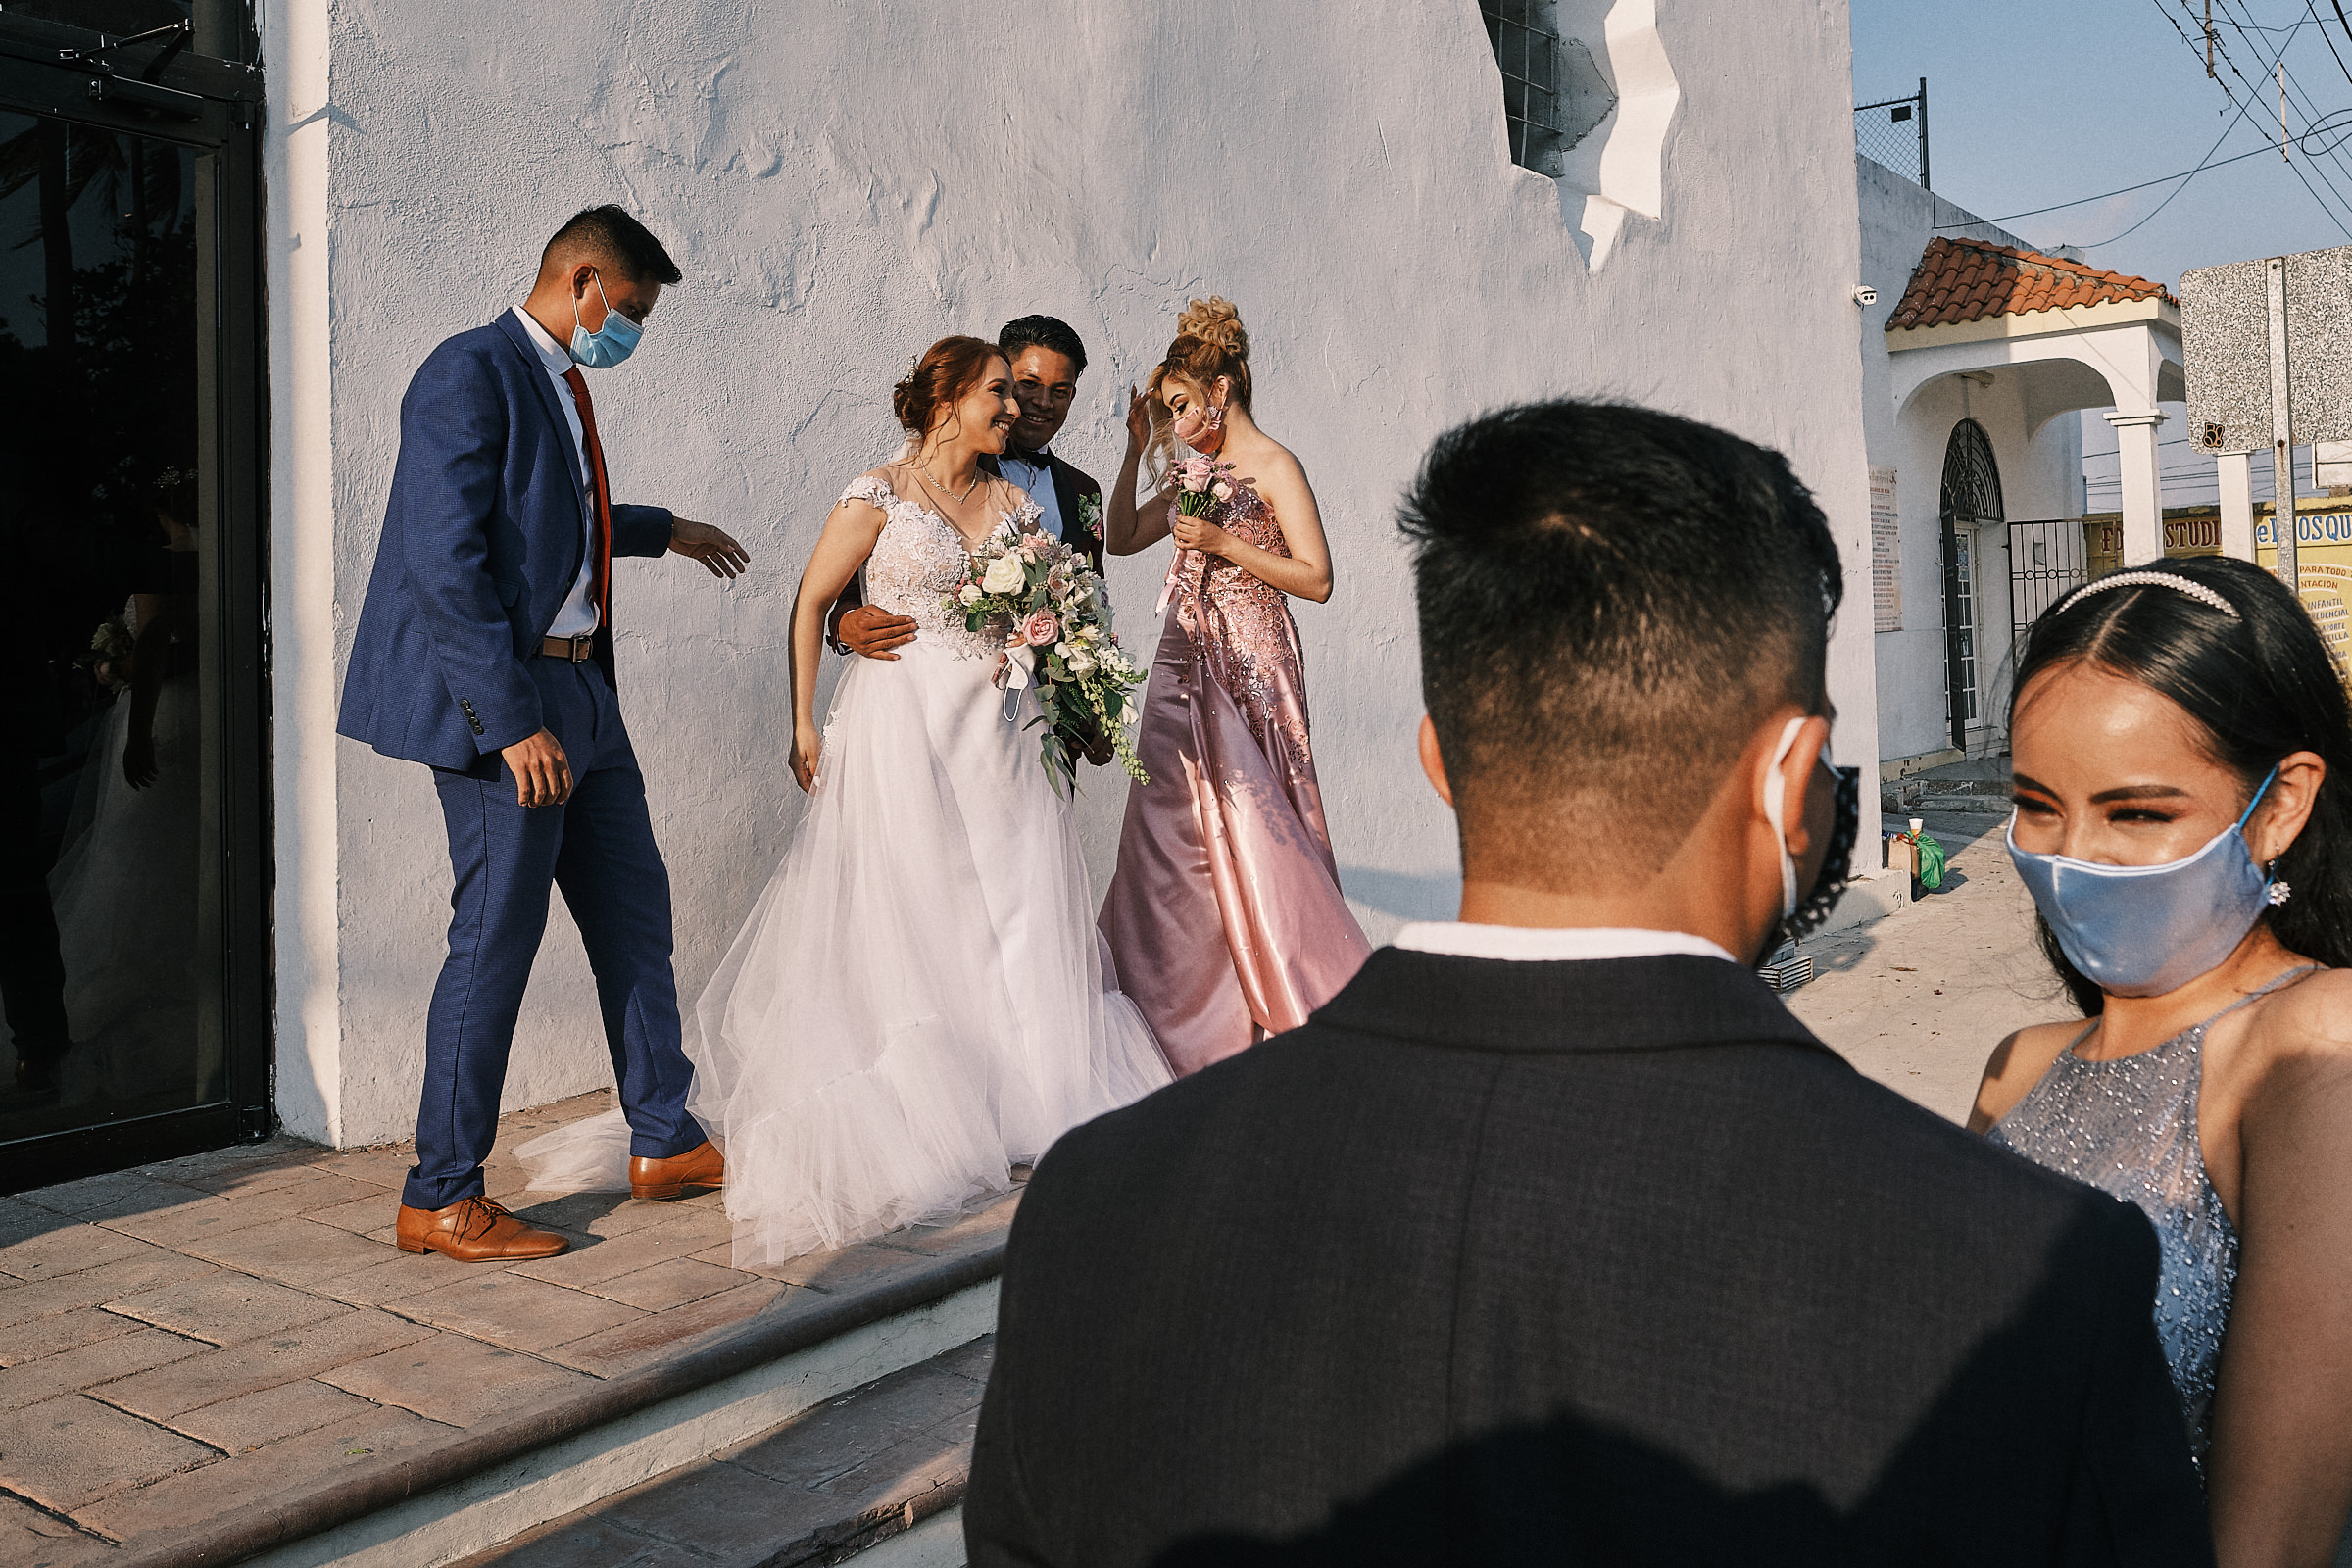 Couple Takes Photos With Guests While Sister Of The Bride Haves A Happy Talk With Her Partner